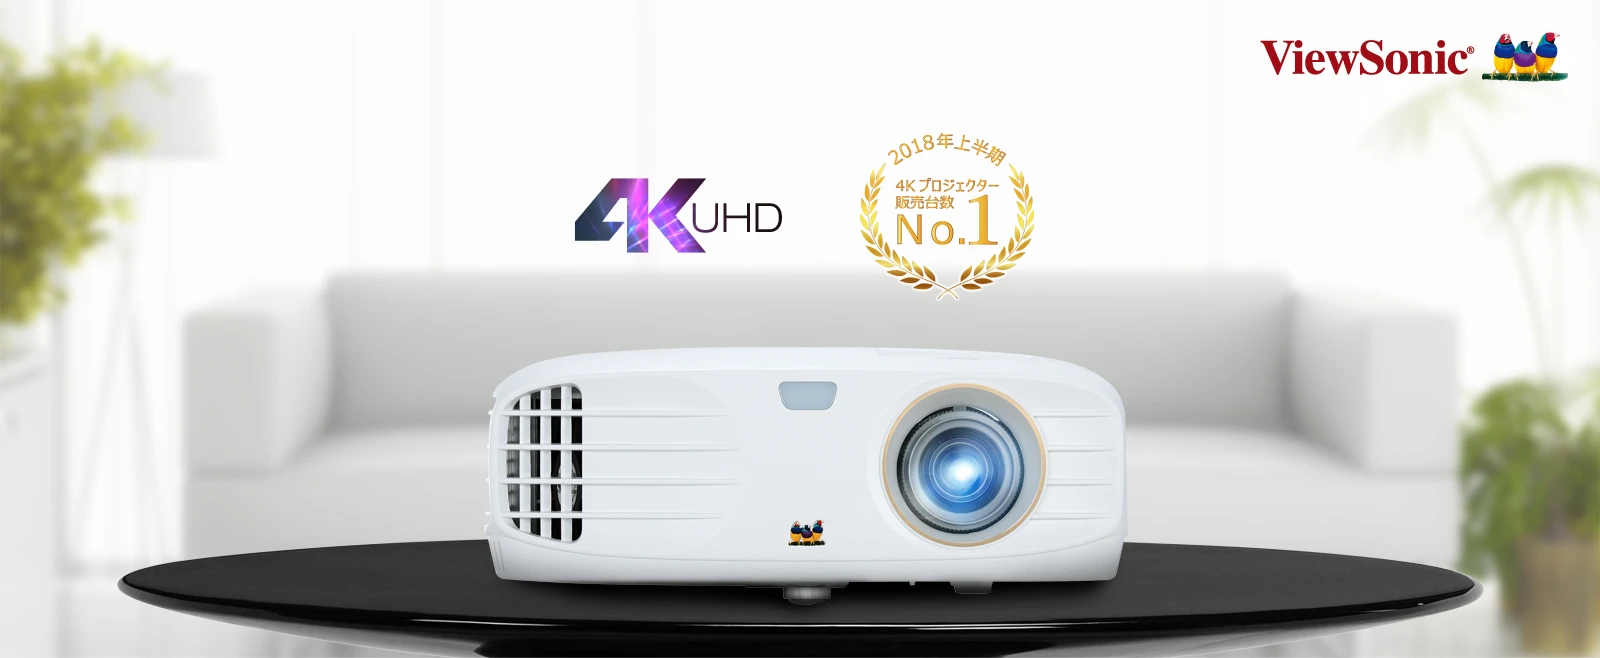 ViewSonic 4K Projectors Gained No.1 Ranking in Japan - News - Company  Information - ViewSonic